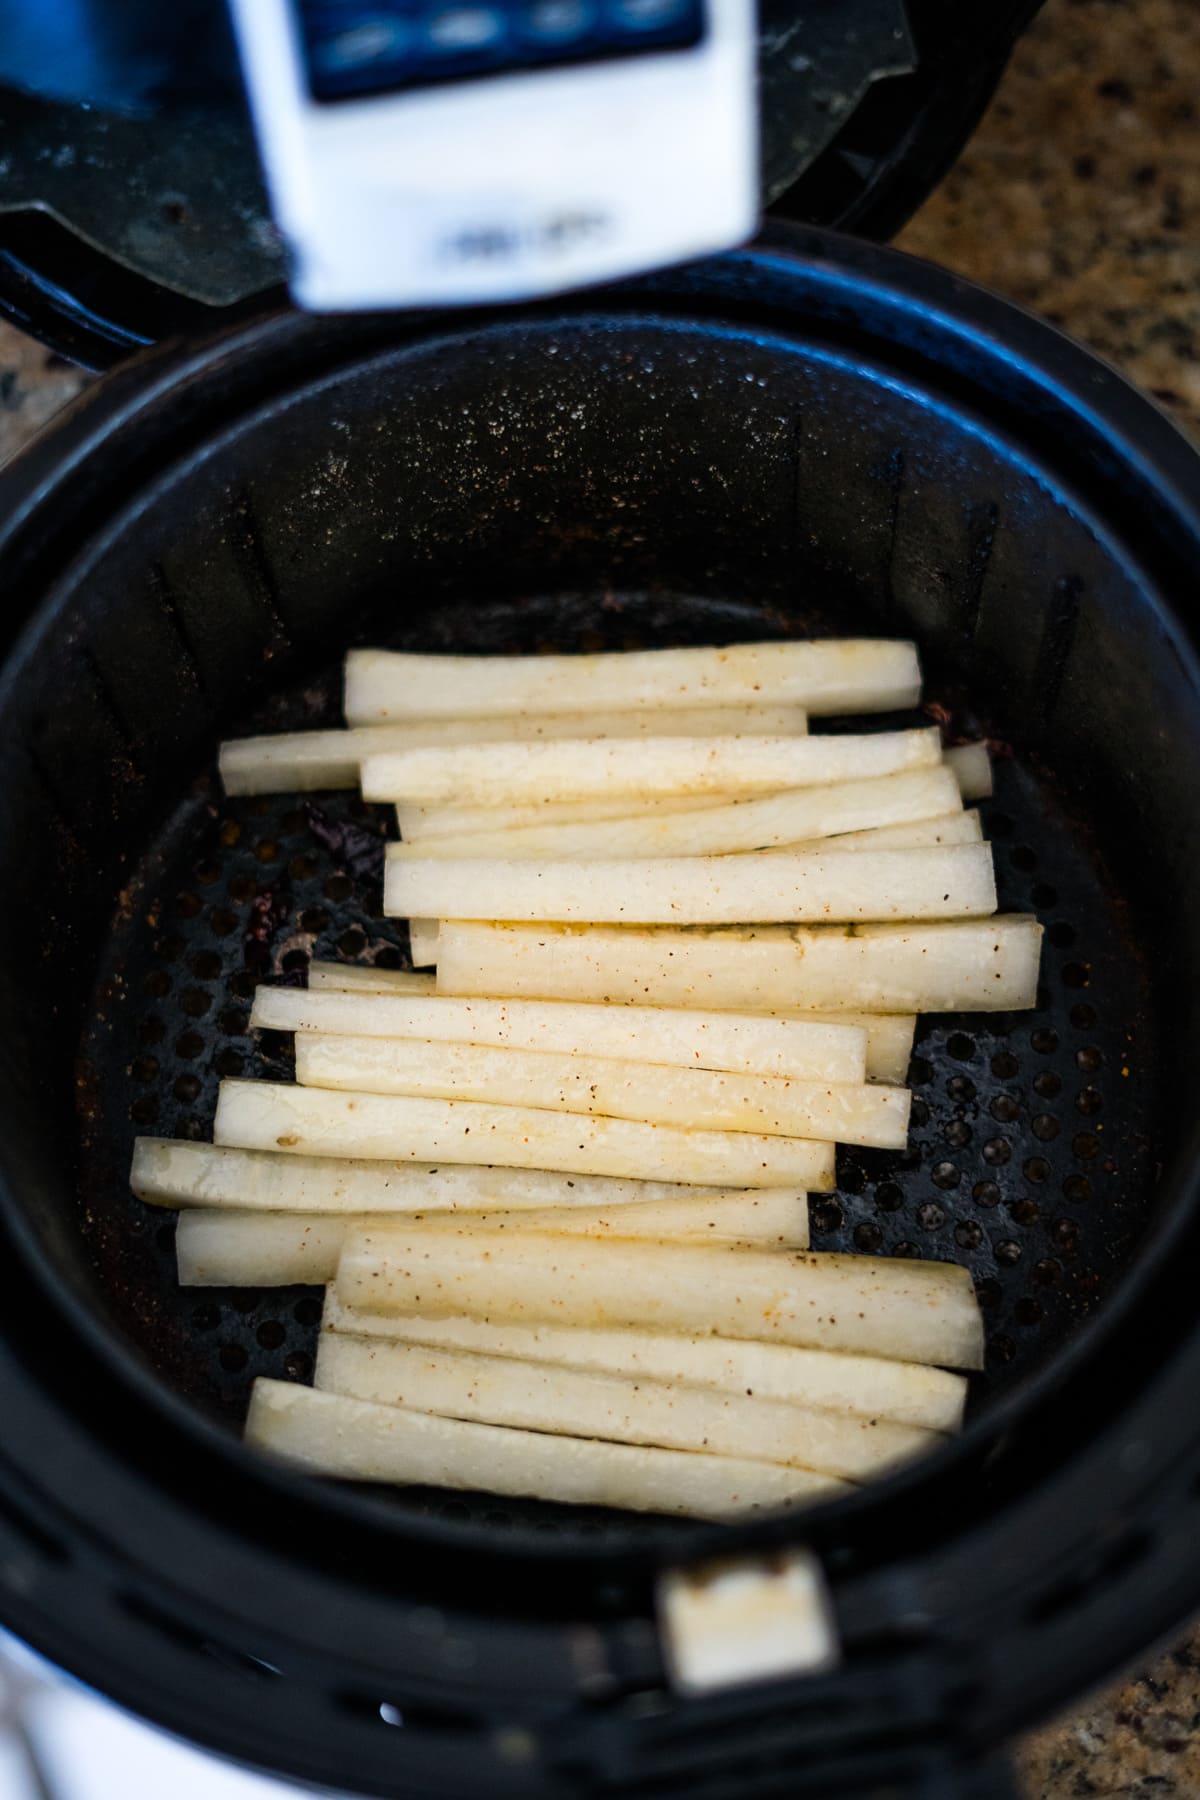 Daikon fries air fried to perfection in the air fryer.